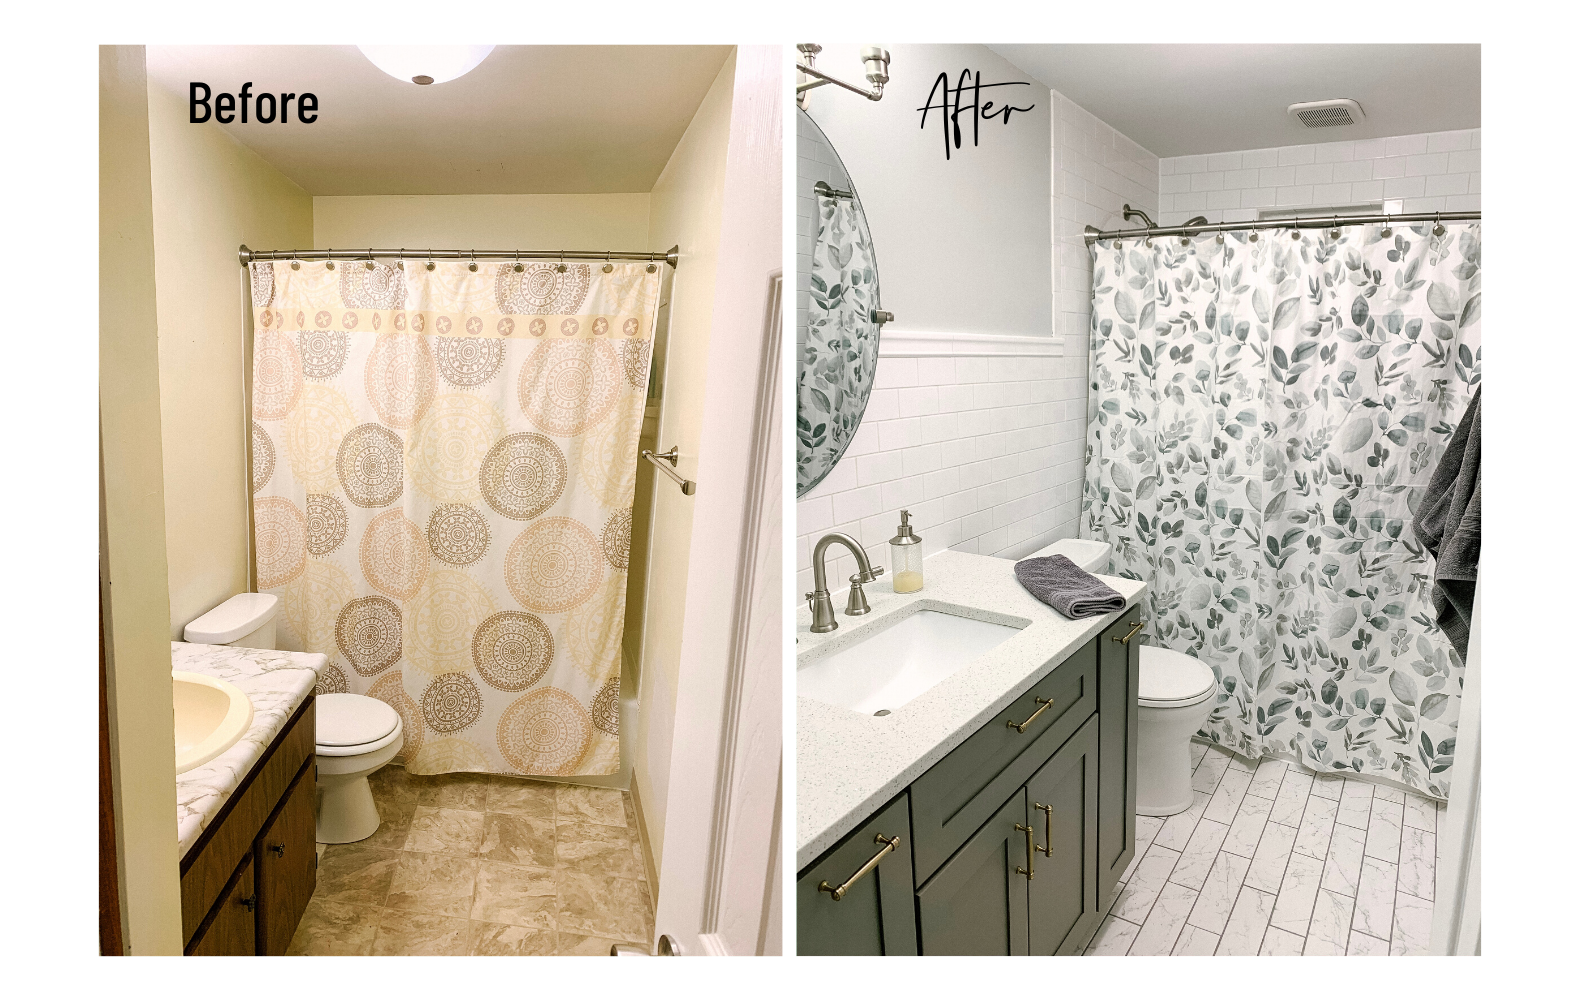 Our Primary Bathroom Remodel Reveal!